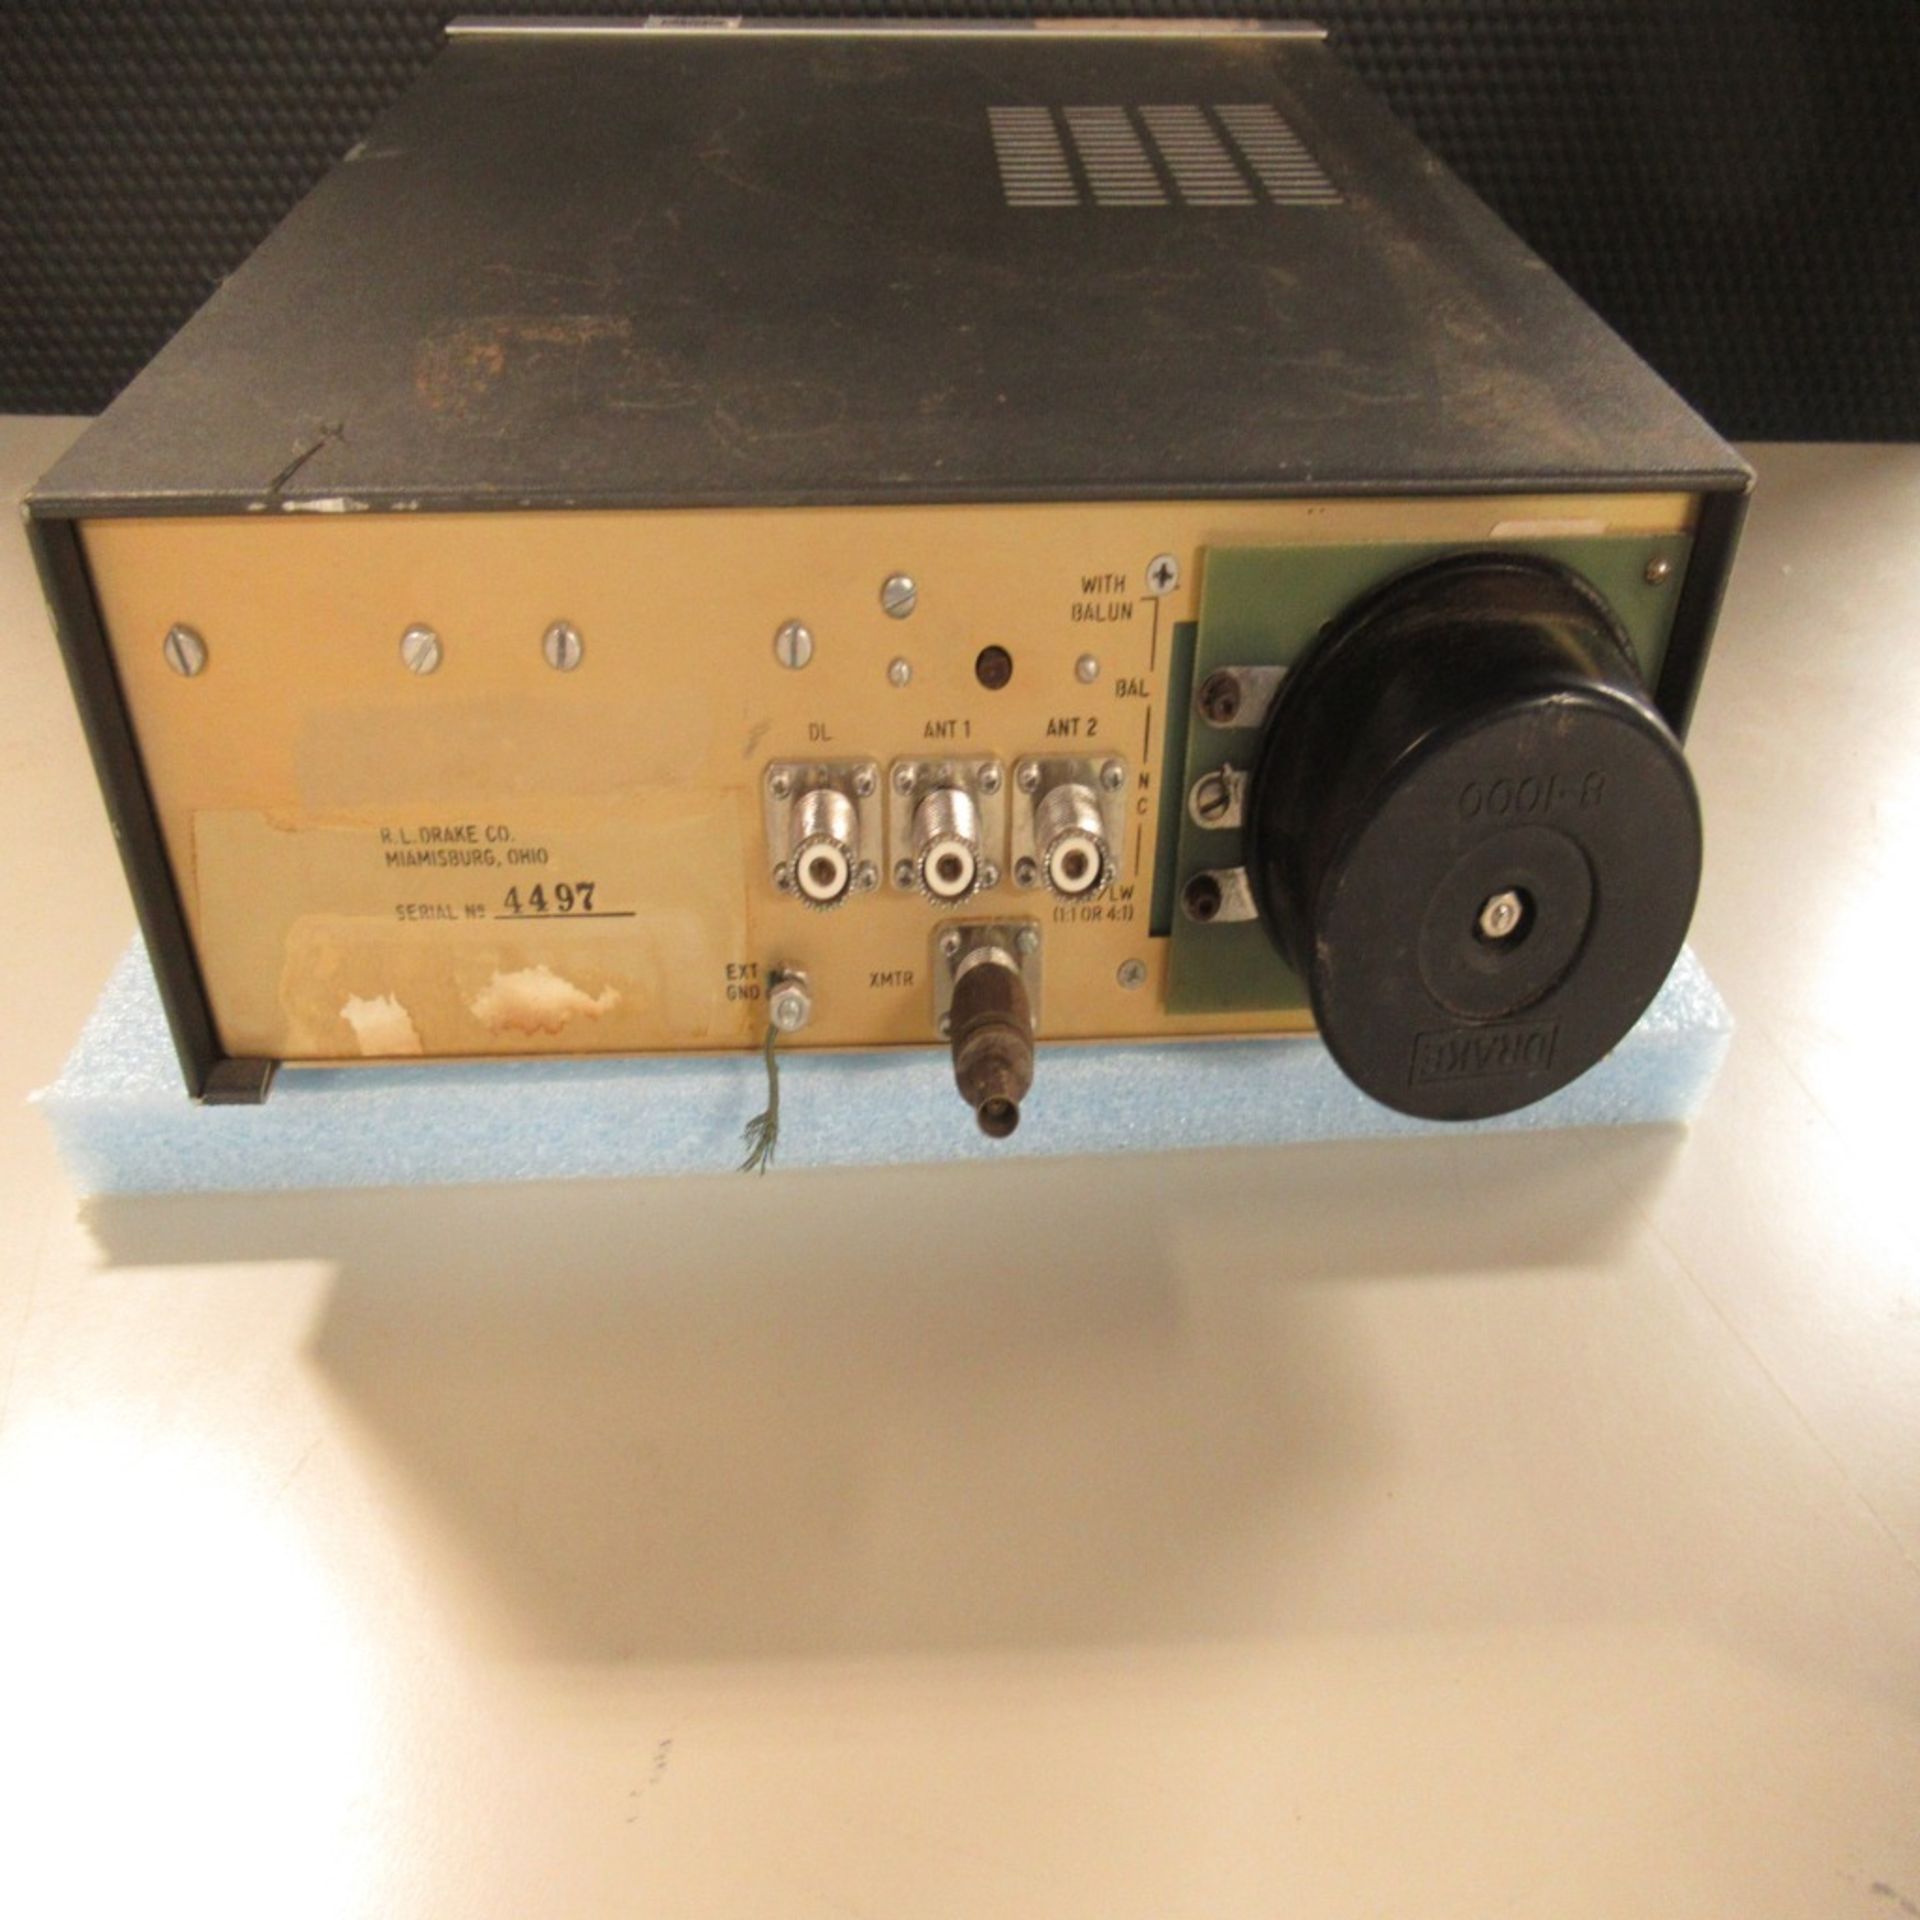 PHOTON SNAP SHOT MODEL 6000 *POWERS ON* NO SCREEN DISPLAY; FARNELL AP20-80 REGULATED POWER SUPPLY * - Image 167 of 222